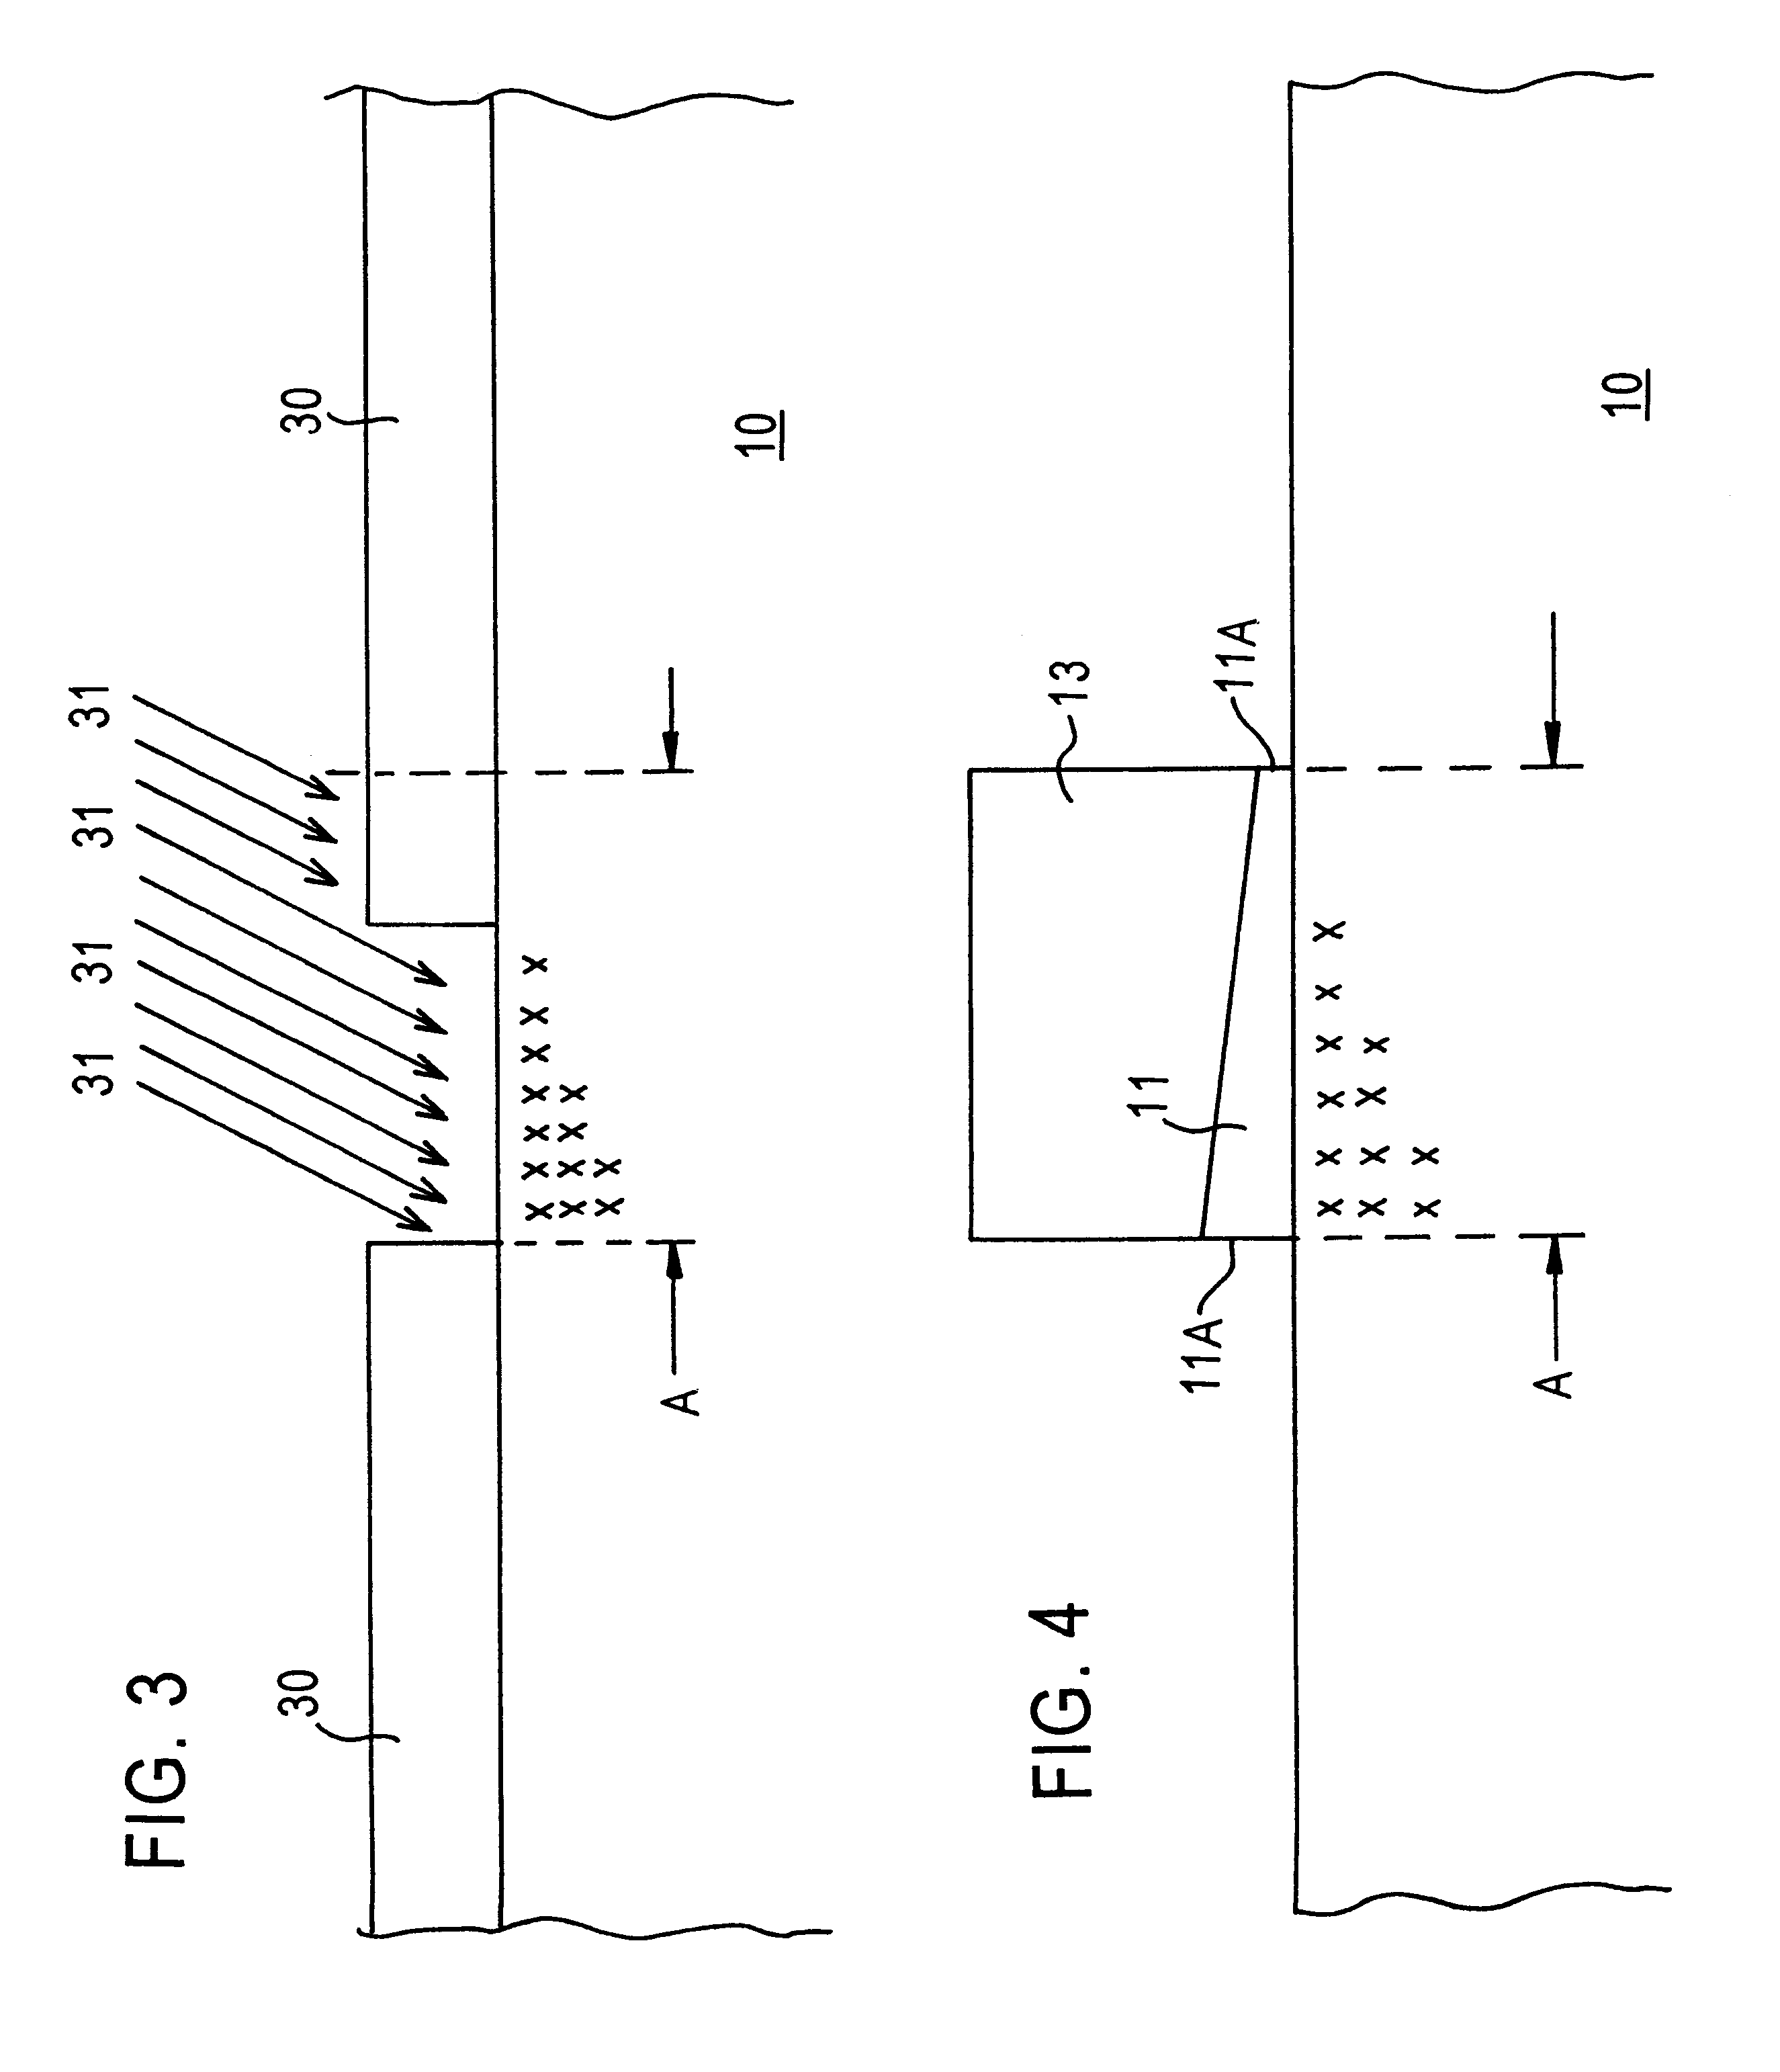 Semiconductor device with a modulated gate oxide thickness